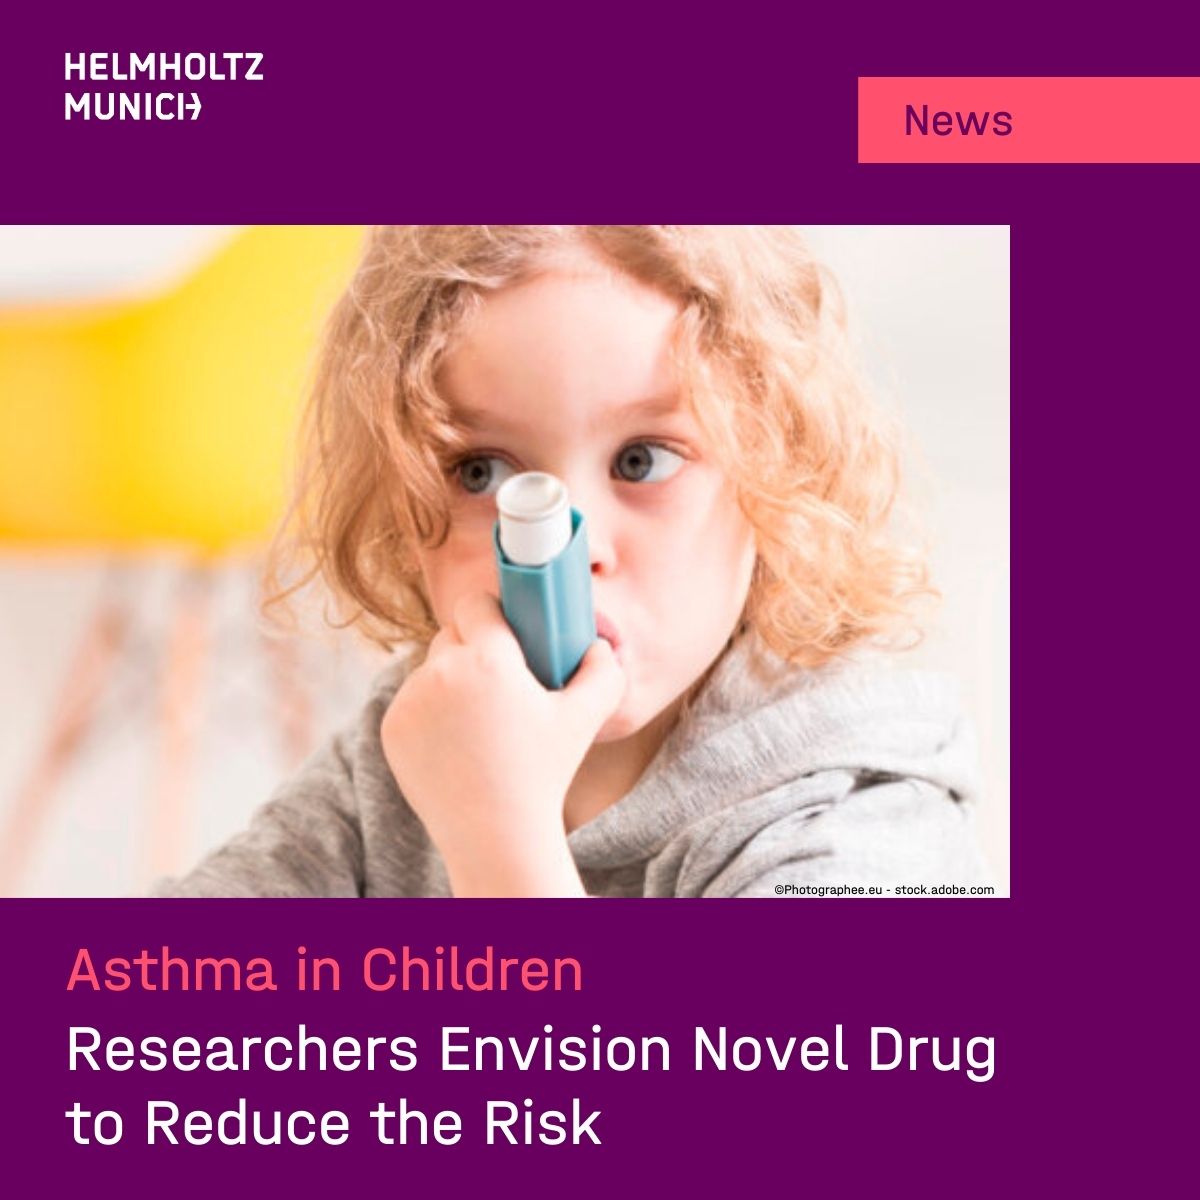 🫁Childhood asthma: Milestone for novel drug targeting a genetic defect. Researchers have clarified how a genetic defect in children initially leads to frequent #infections & later to #asthma. Their aim: Controlling viral infection to reduce asthma: 👉t1p.de/std3j